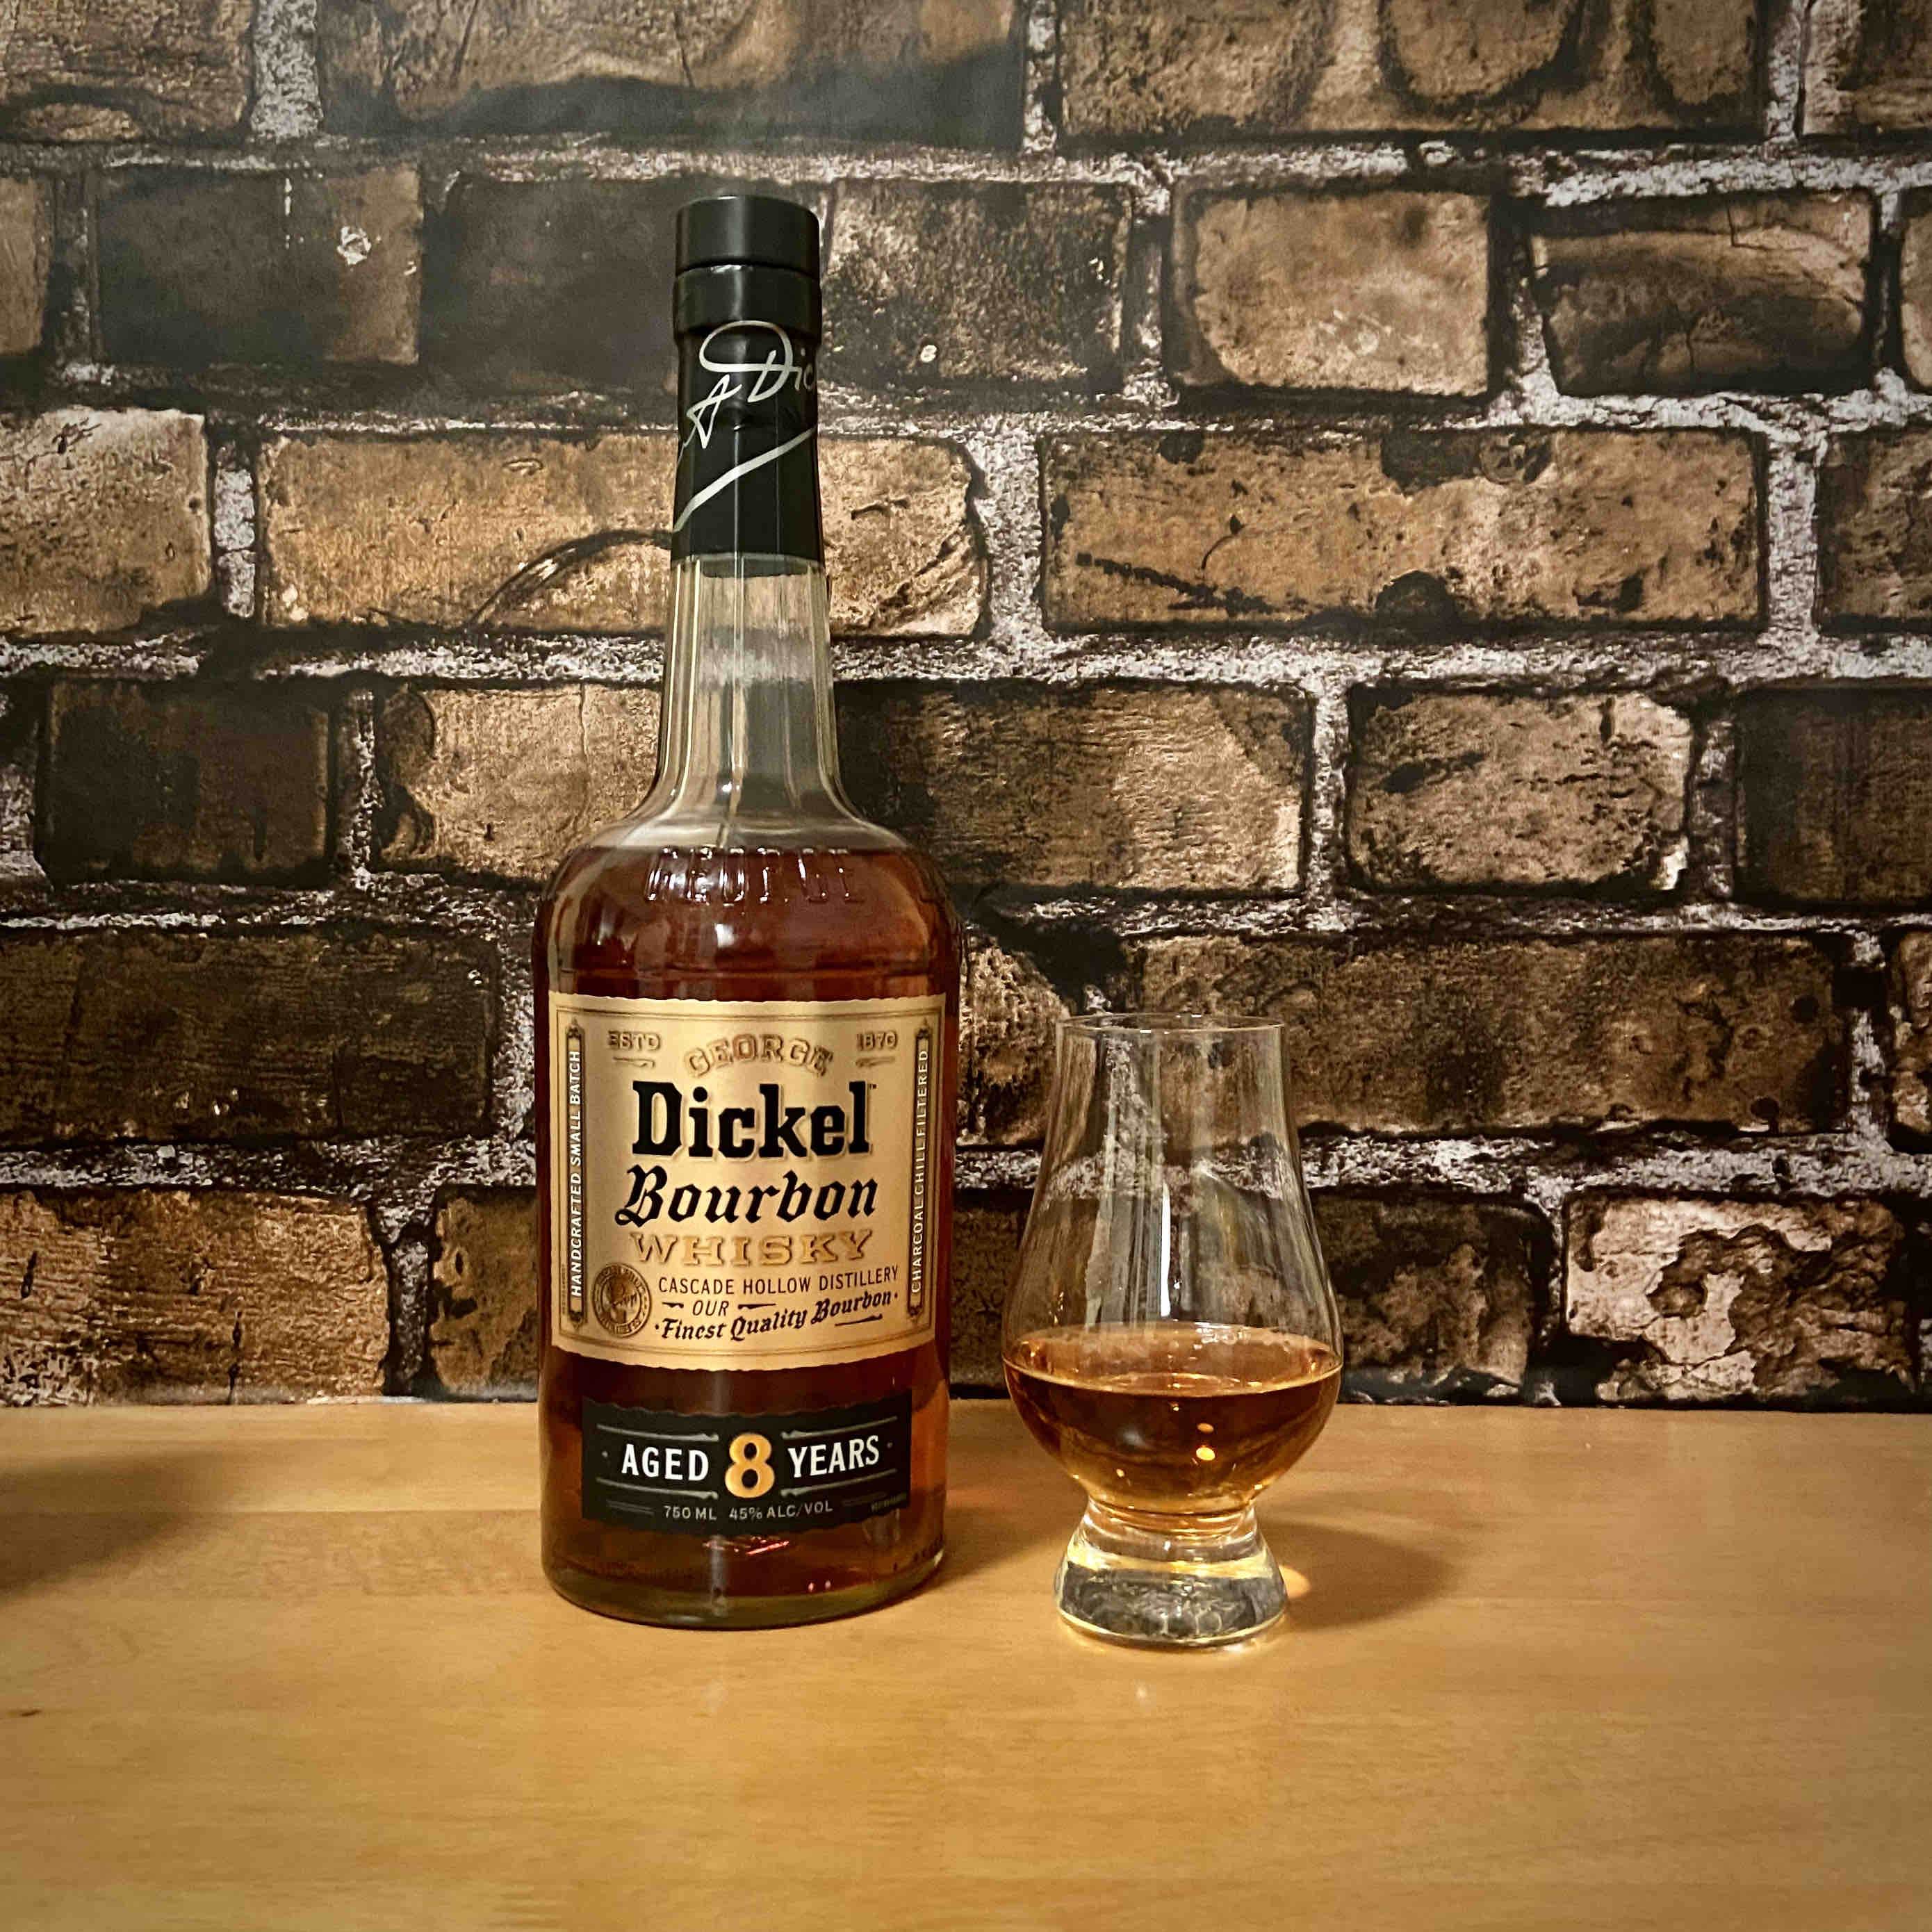 George Dickel Bourbon Whisky is an 8 year aged whisky from Tullahoma, Tennessee.